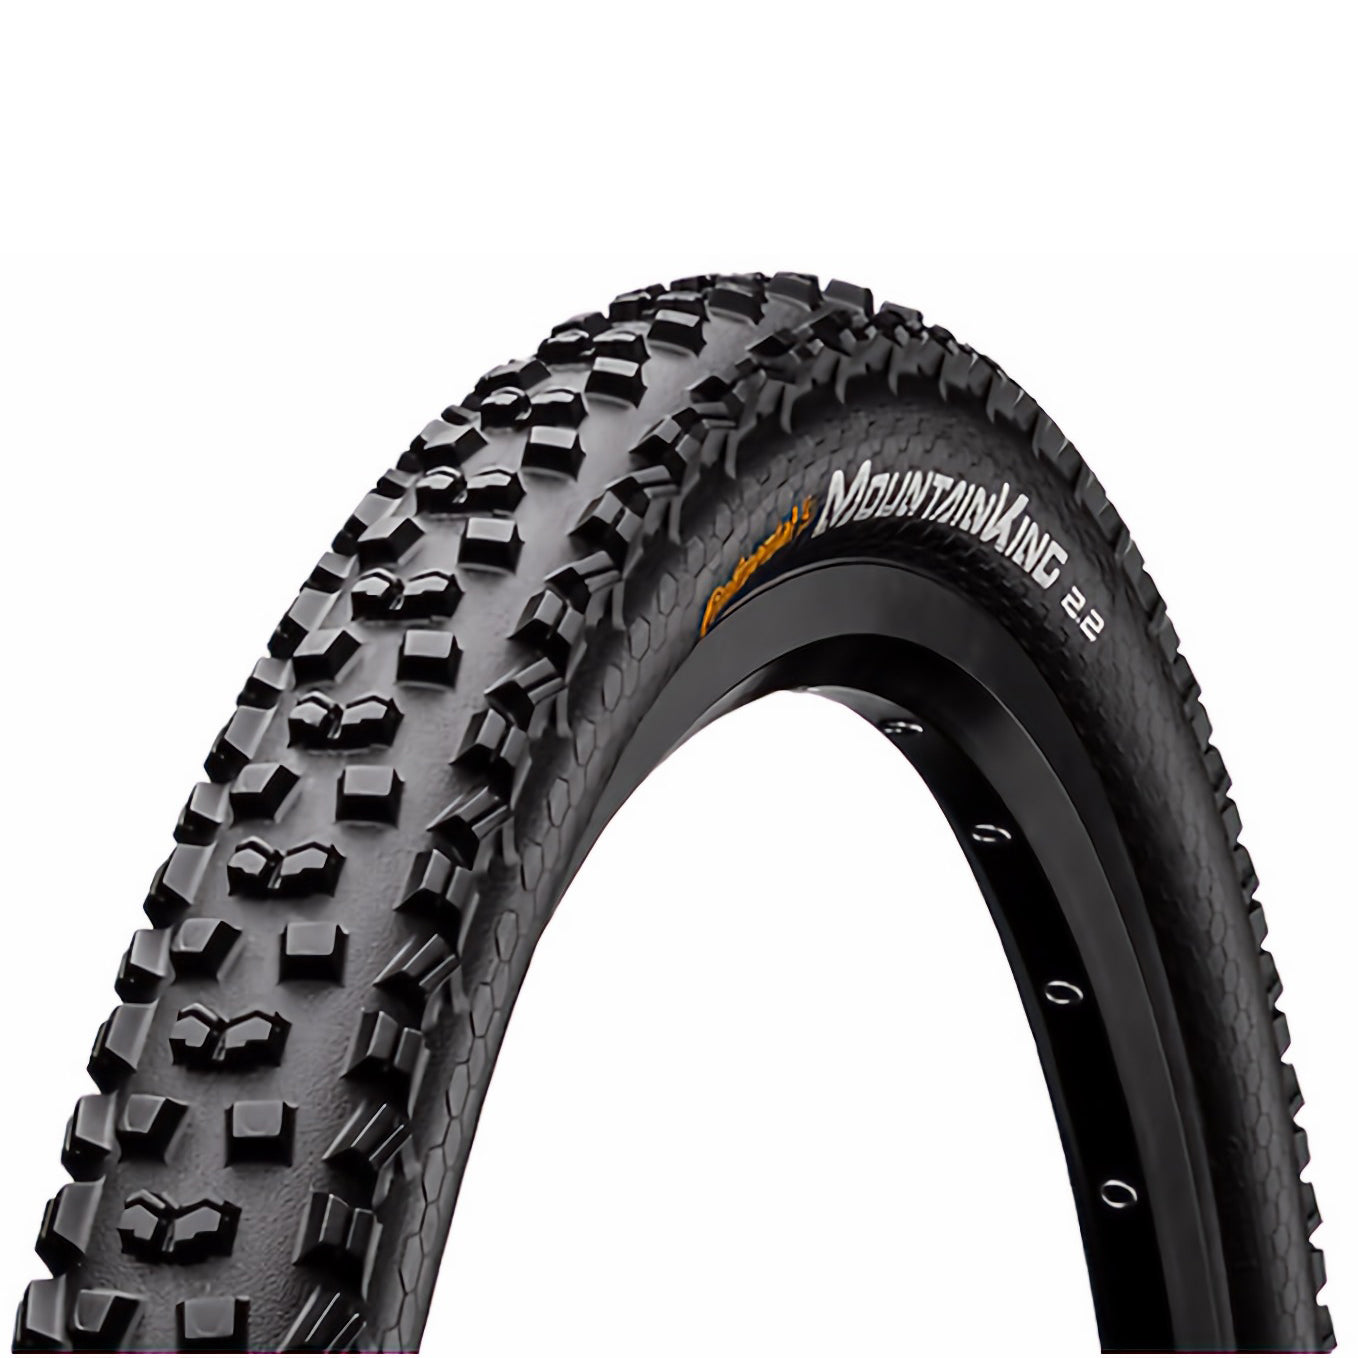 Continental Mountain King II Tyre - 27.5 Inch - 2.3 Inch - Yes - PureGrip - Single Ply - Medium - Light-Duty Protection - TR Kevlar Folding - Black